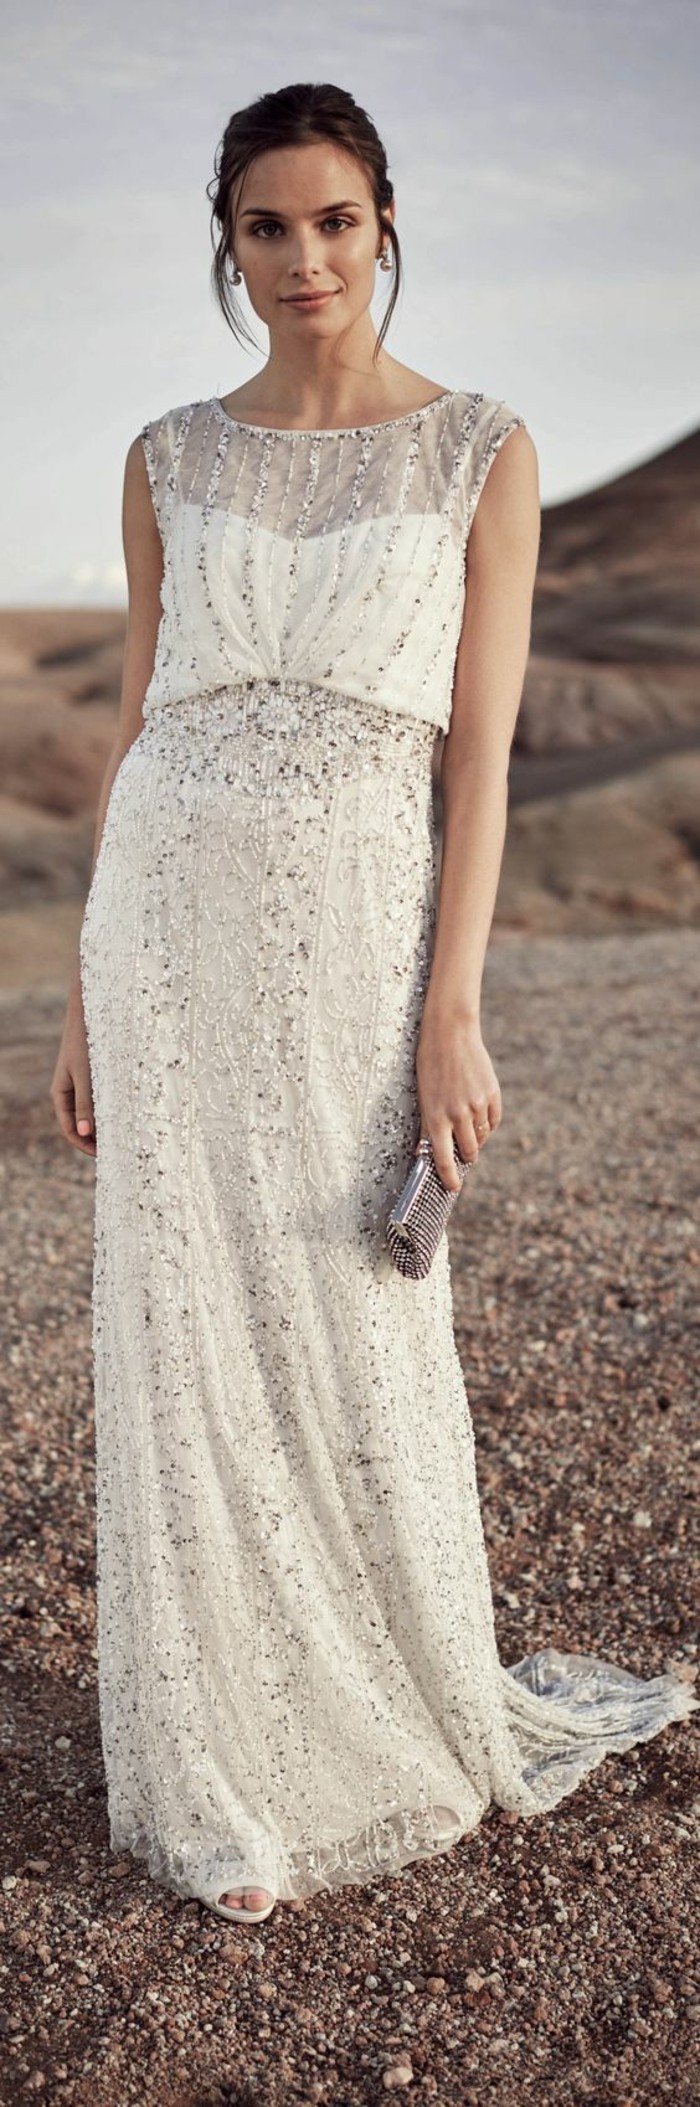 1653108836 844 Wedding dresses in boho style the hottest trend for your - Wedding dresses in boho style: the hottest trend for your wedding celebration!